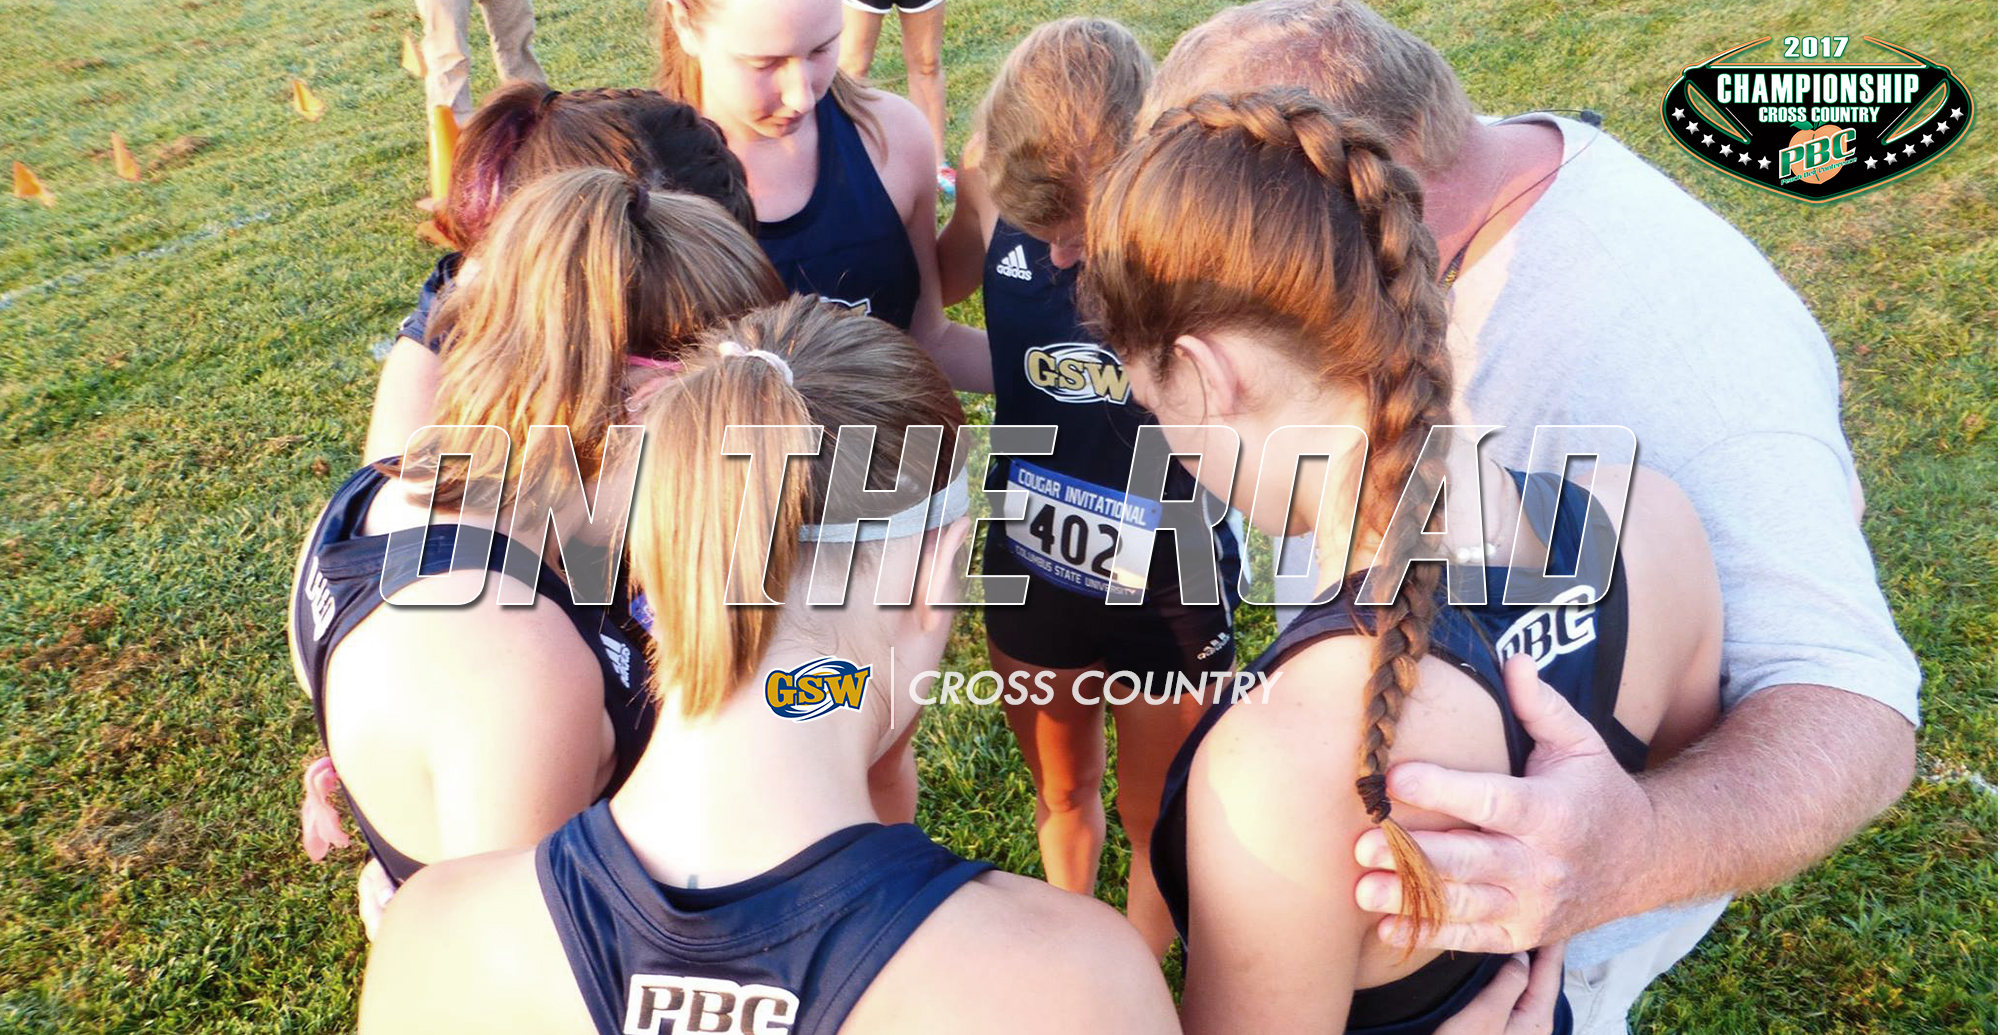 On The Road Saturday: Cross Country Returns To Fort Benning, Ga.